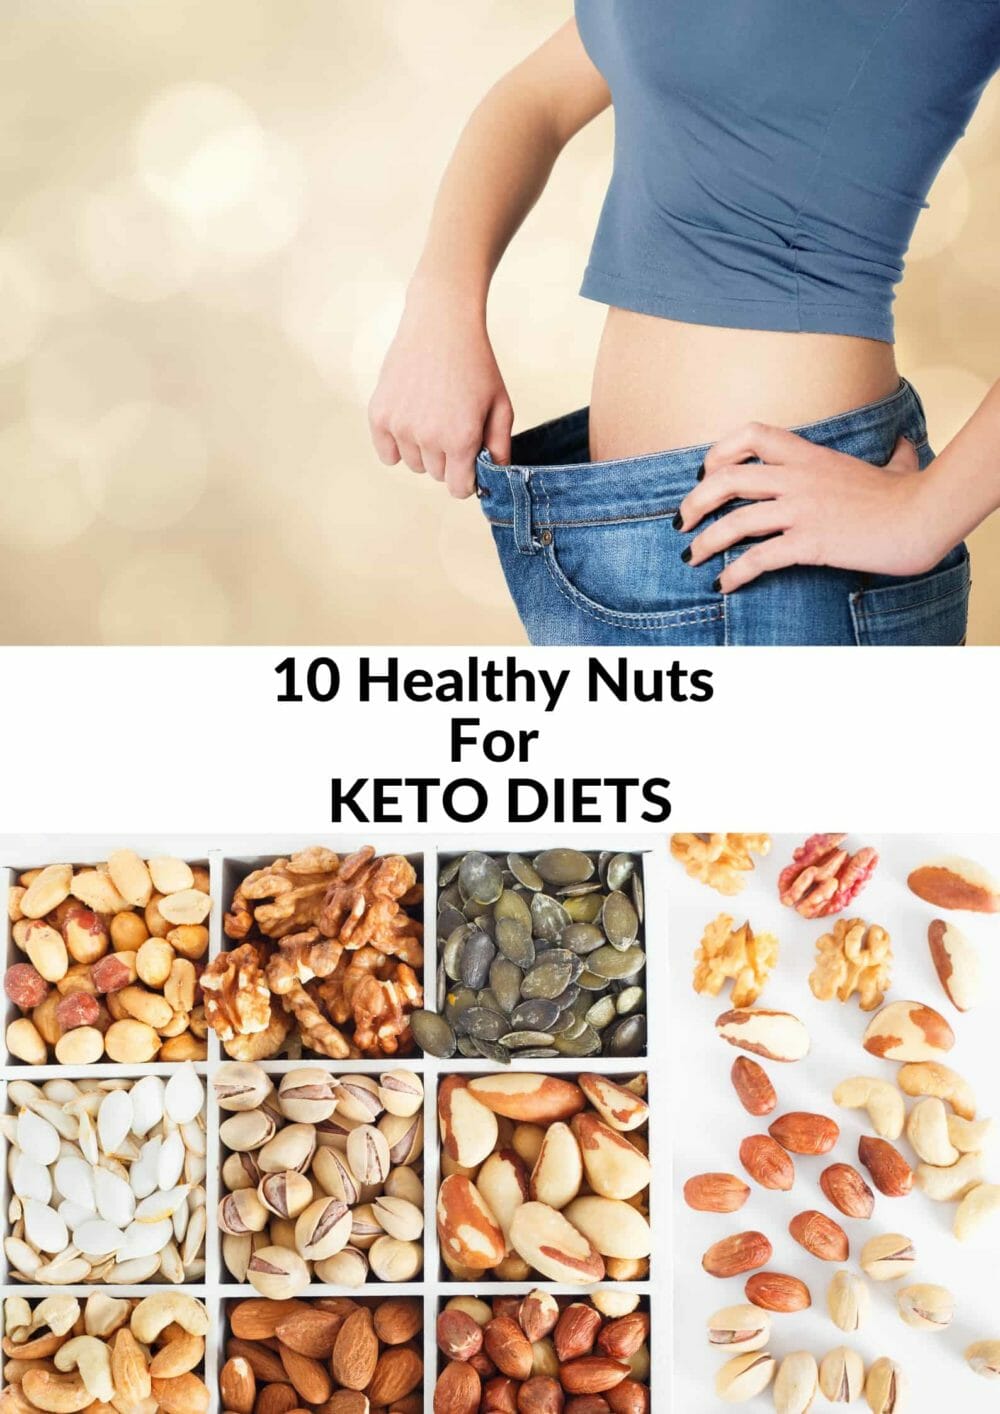 10 Healthy Nuts For Keto Diets | Healthy Nuts For Weight ...